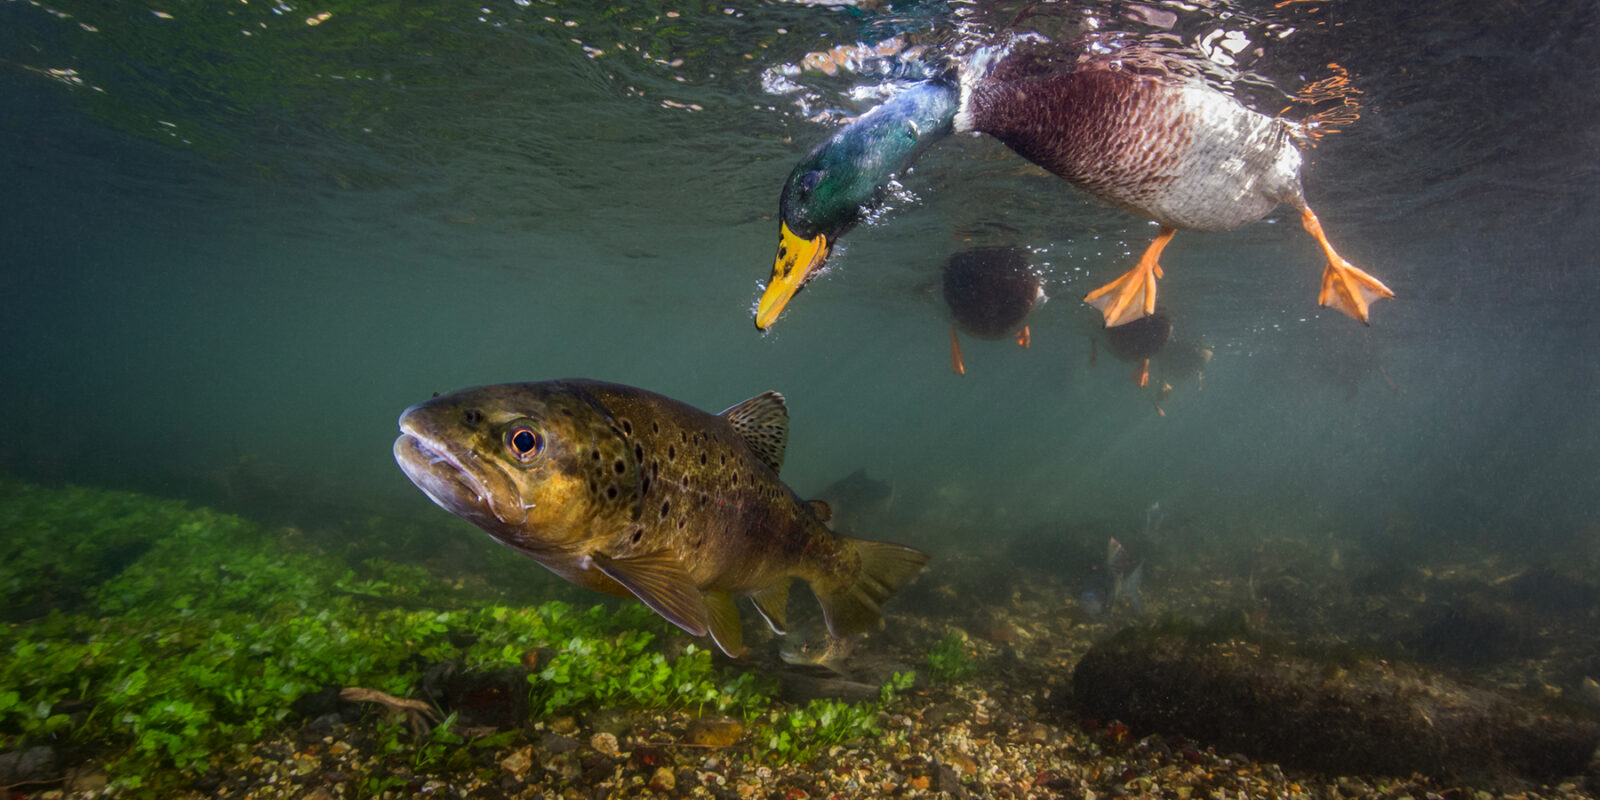 Image of duck underwater with fish